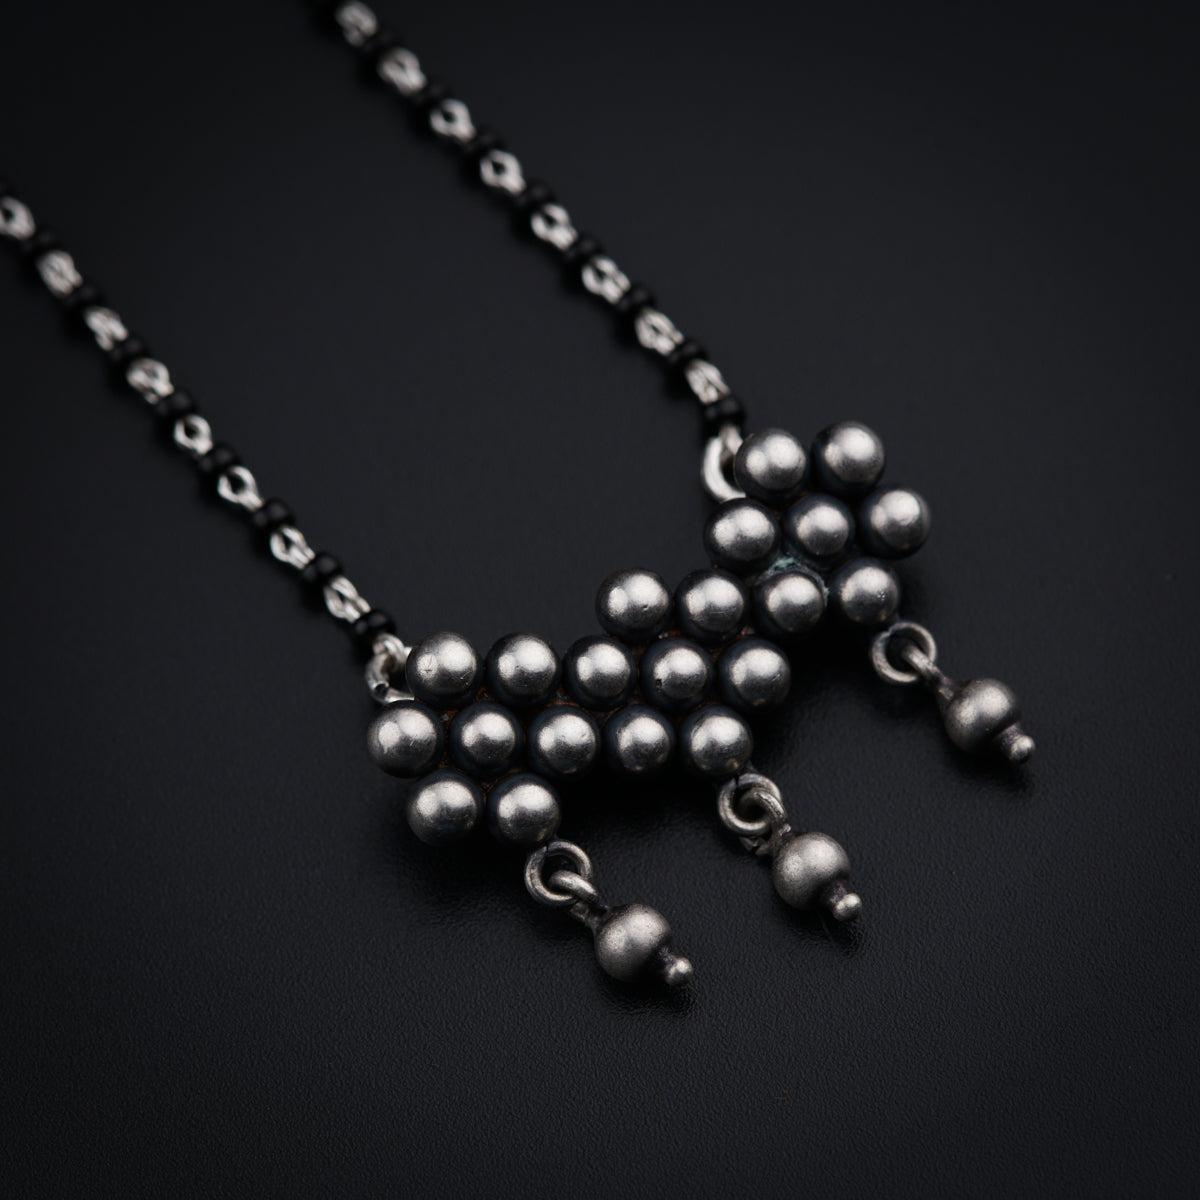 a silver ball chain is shown on a black surface